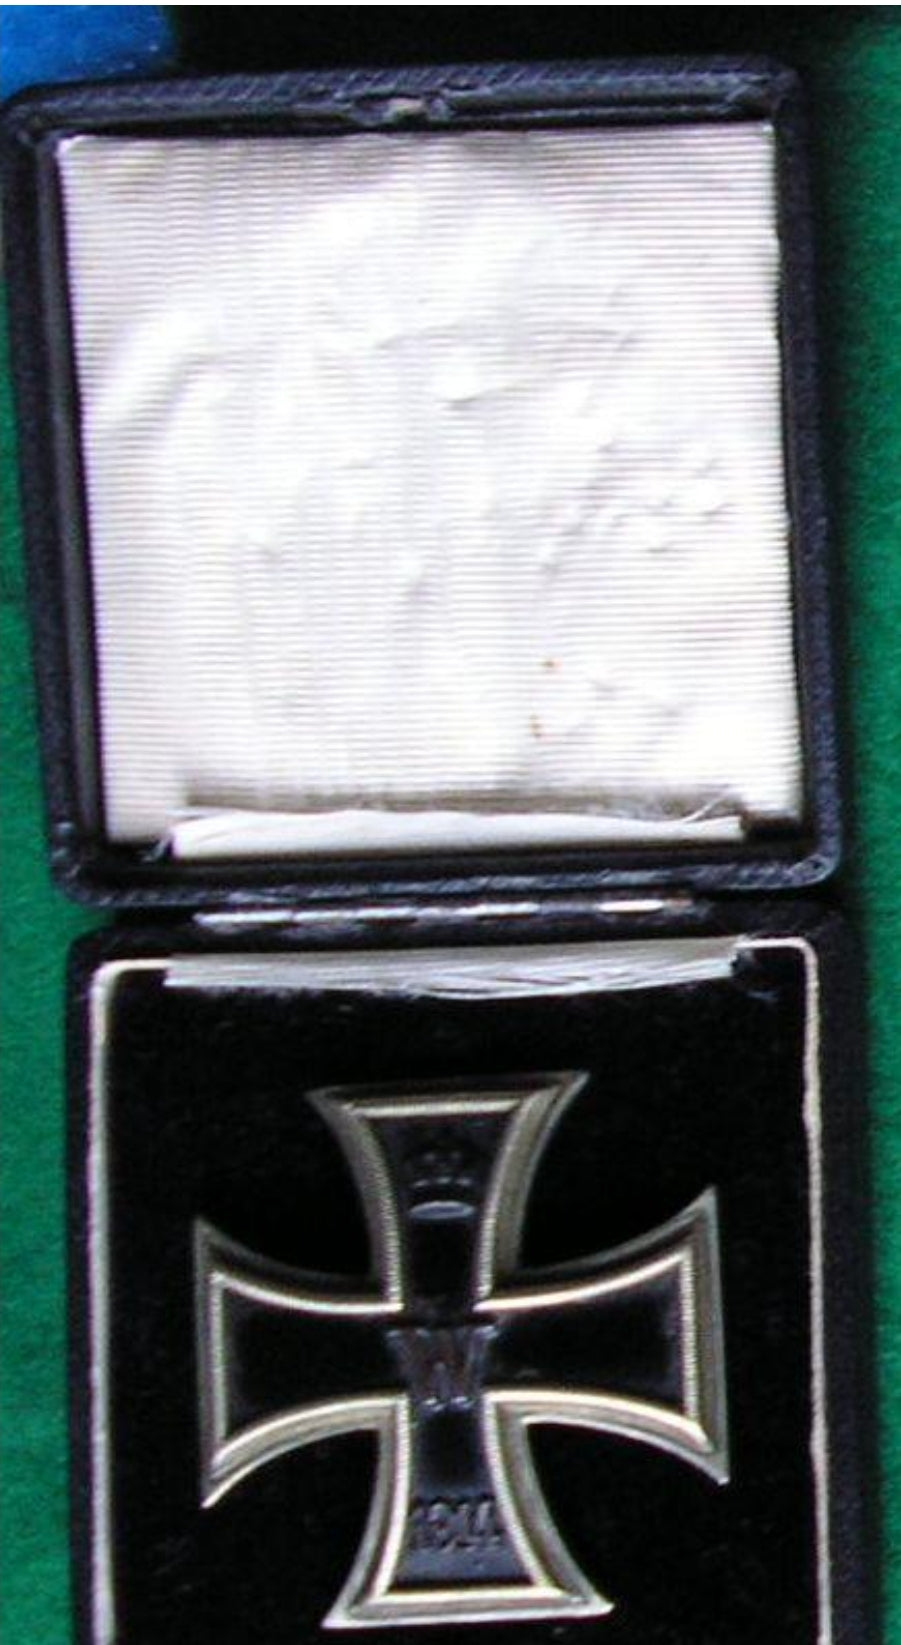 Iron Cross 1914 1st class. Pin model. In its black concession case